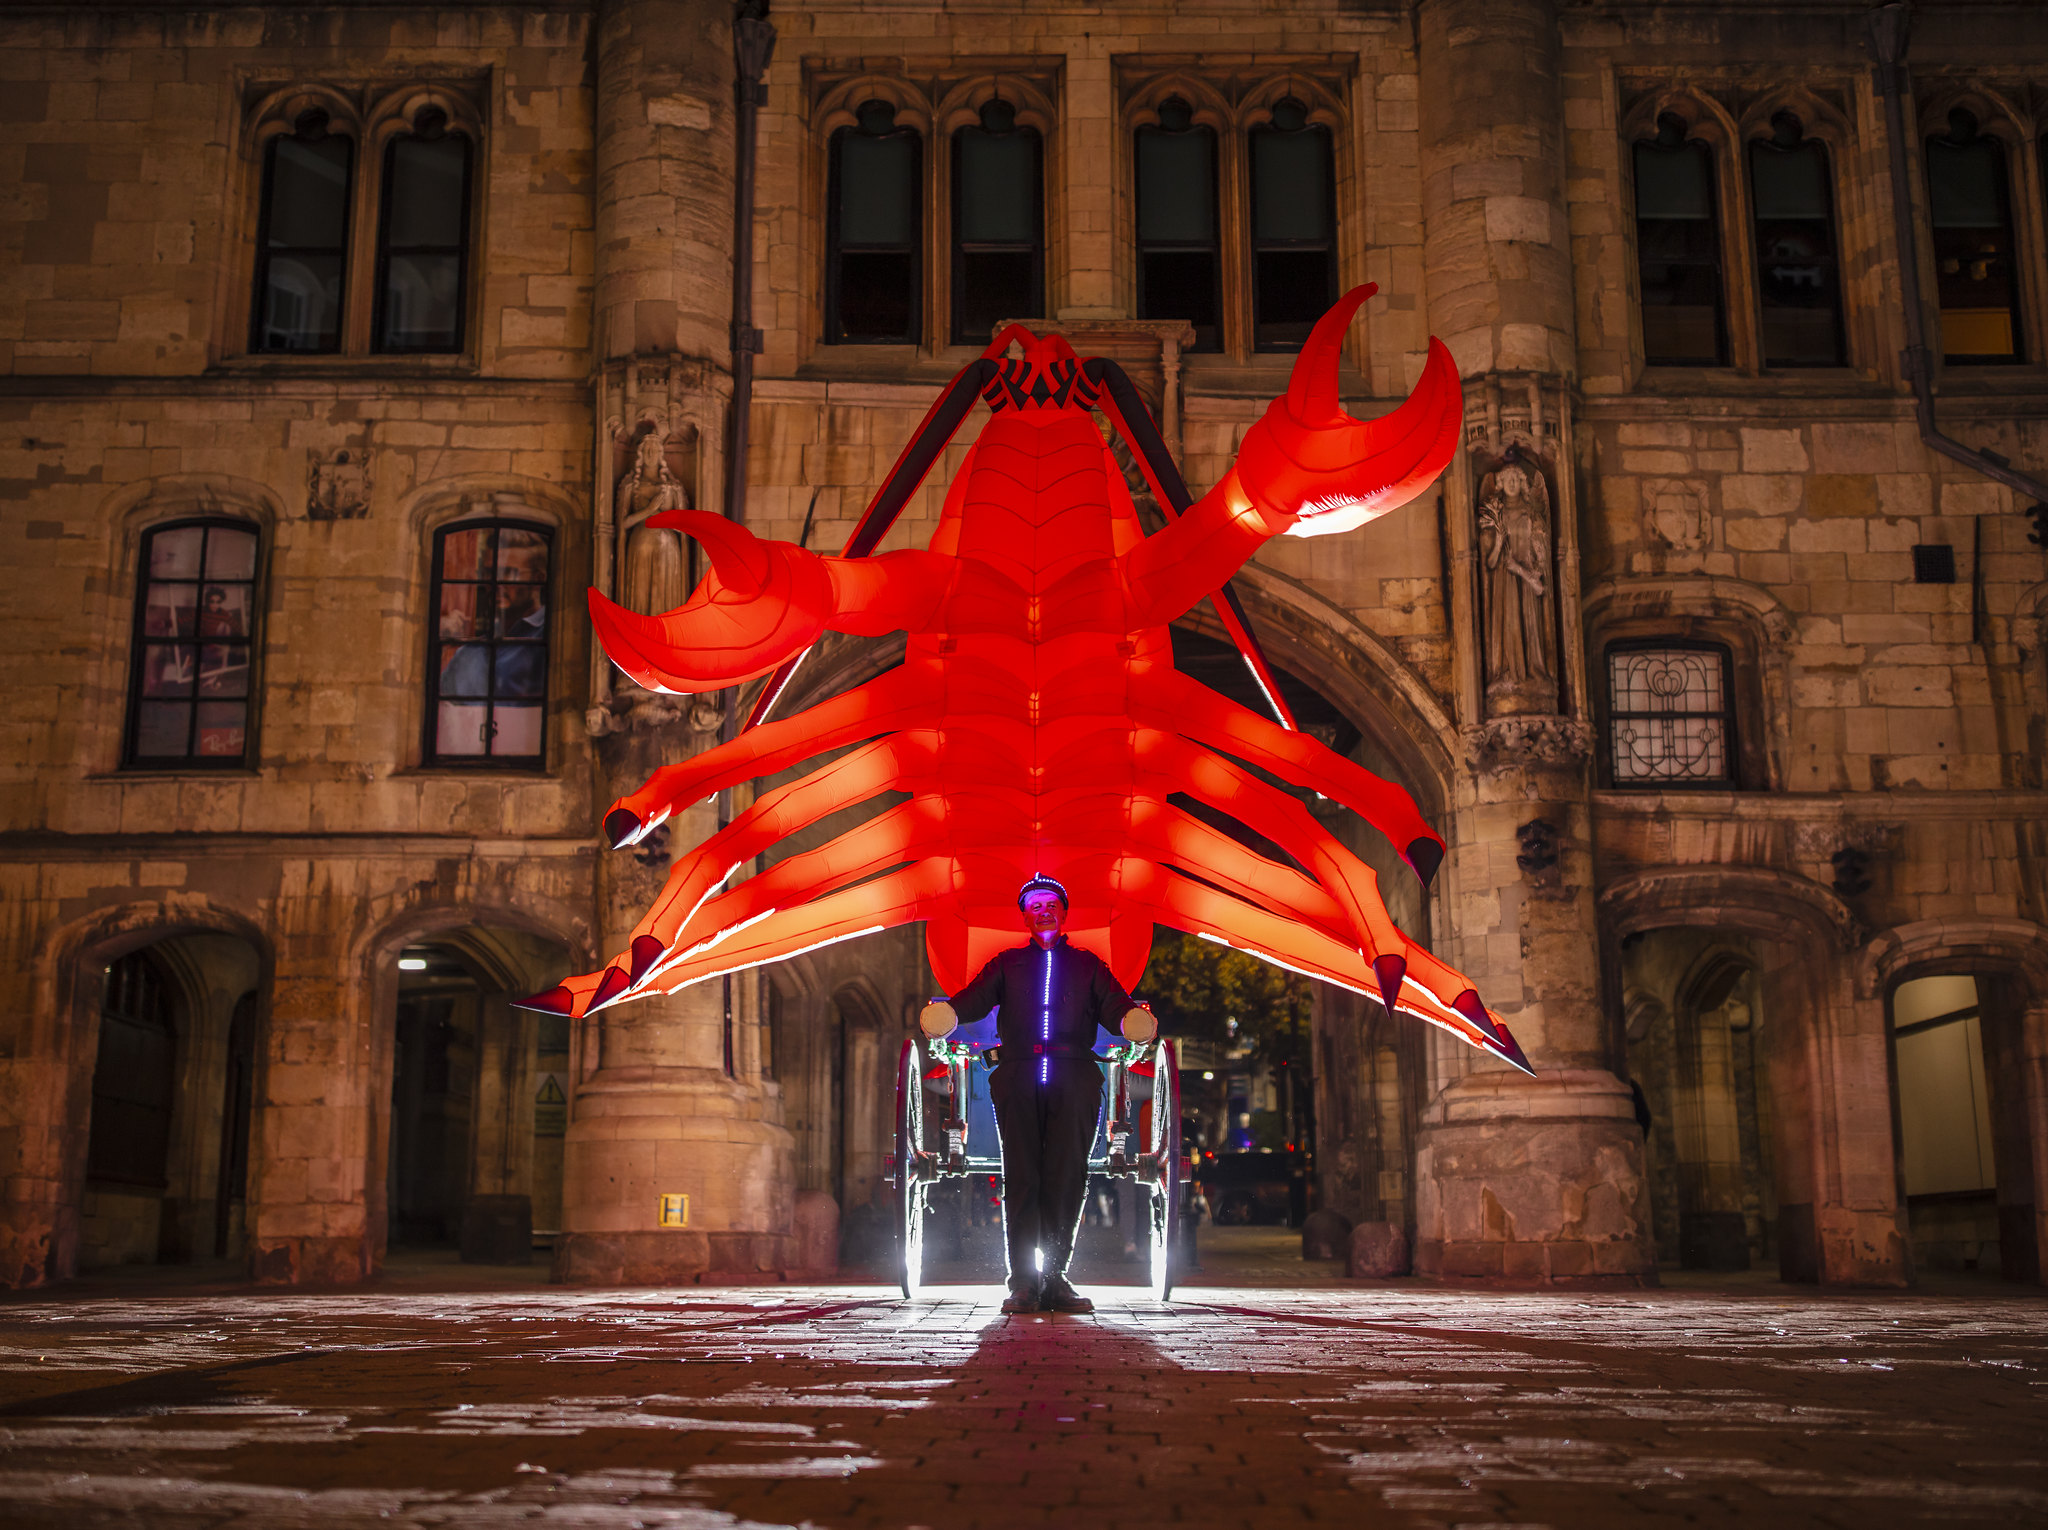 Giant inflatable lobster outside Lincoln guildhall